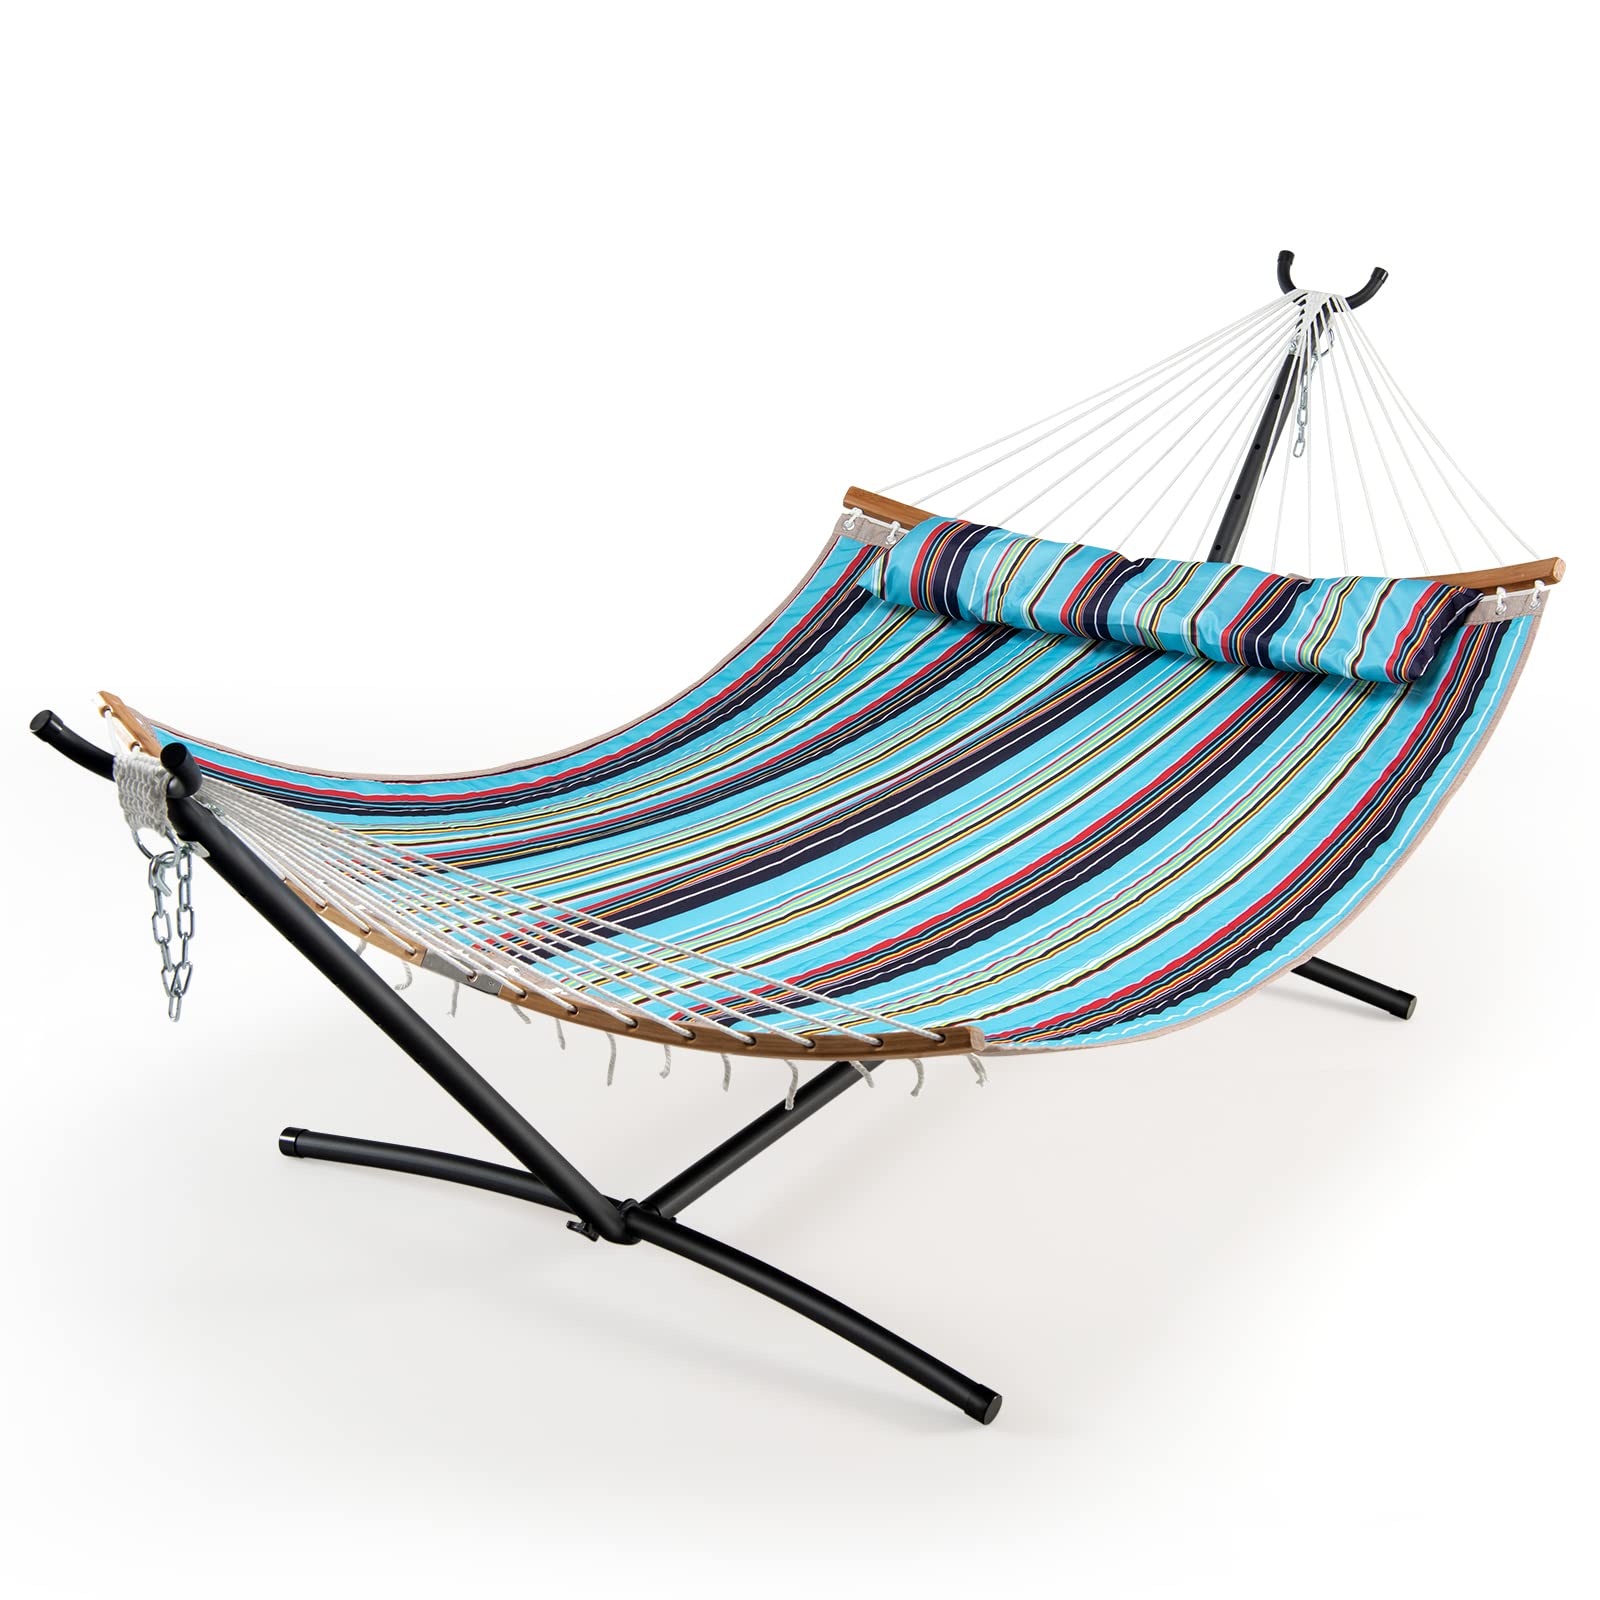 Giantex Hammock with Stand, Outdoor Hammock Swing with Stand Set (Blue&Red)